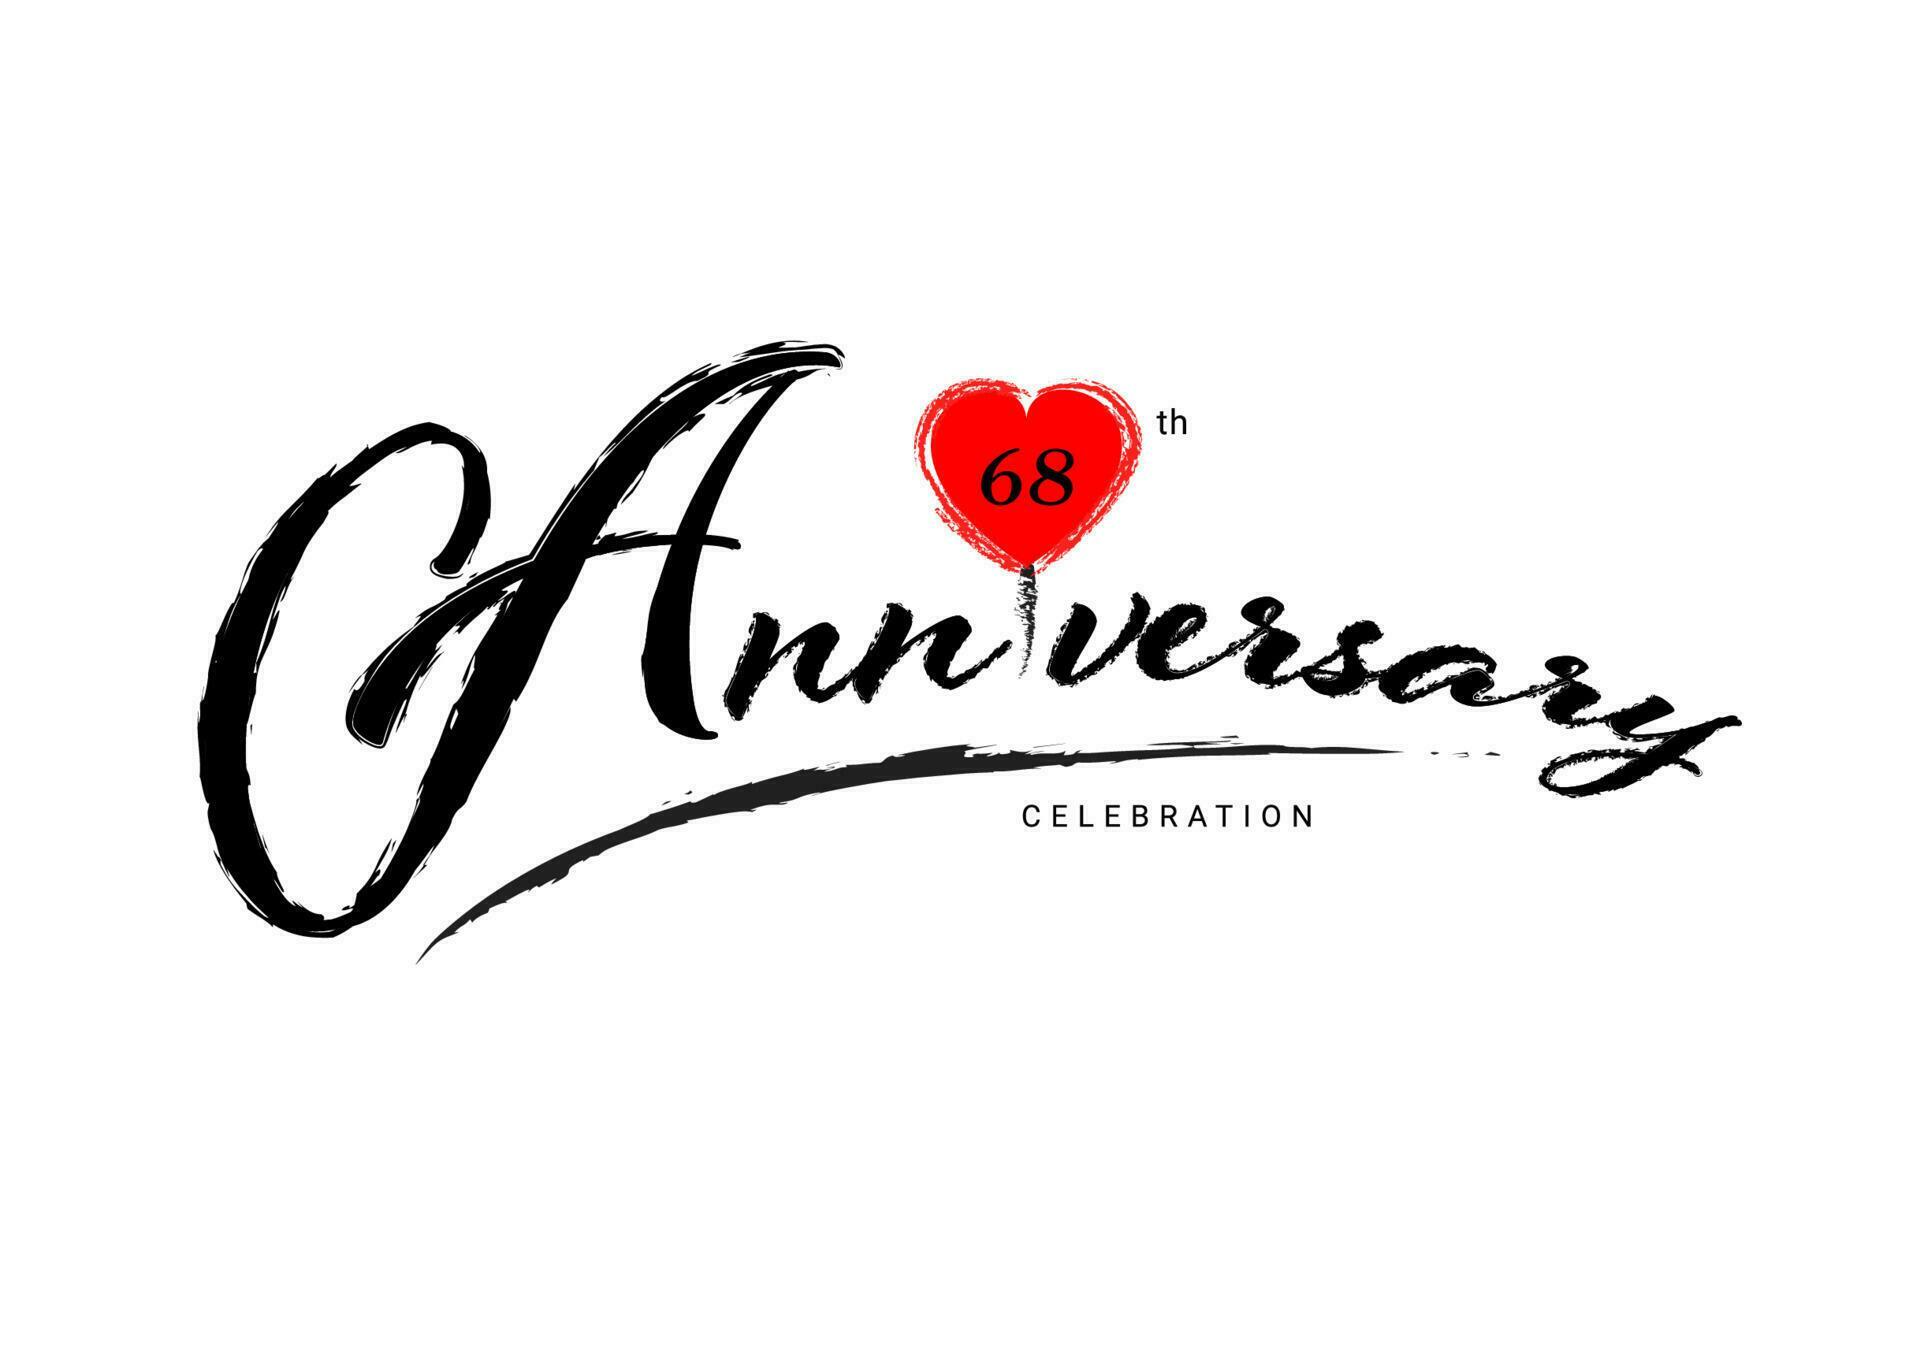 68 Years Anniversary Celebration logo with red heart vector, 68 number ...